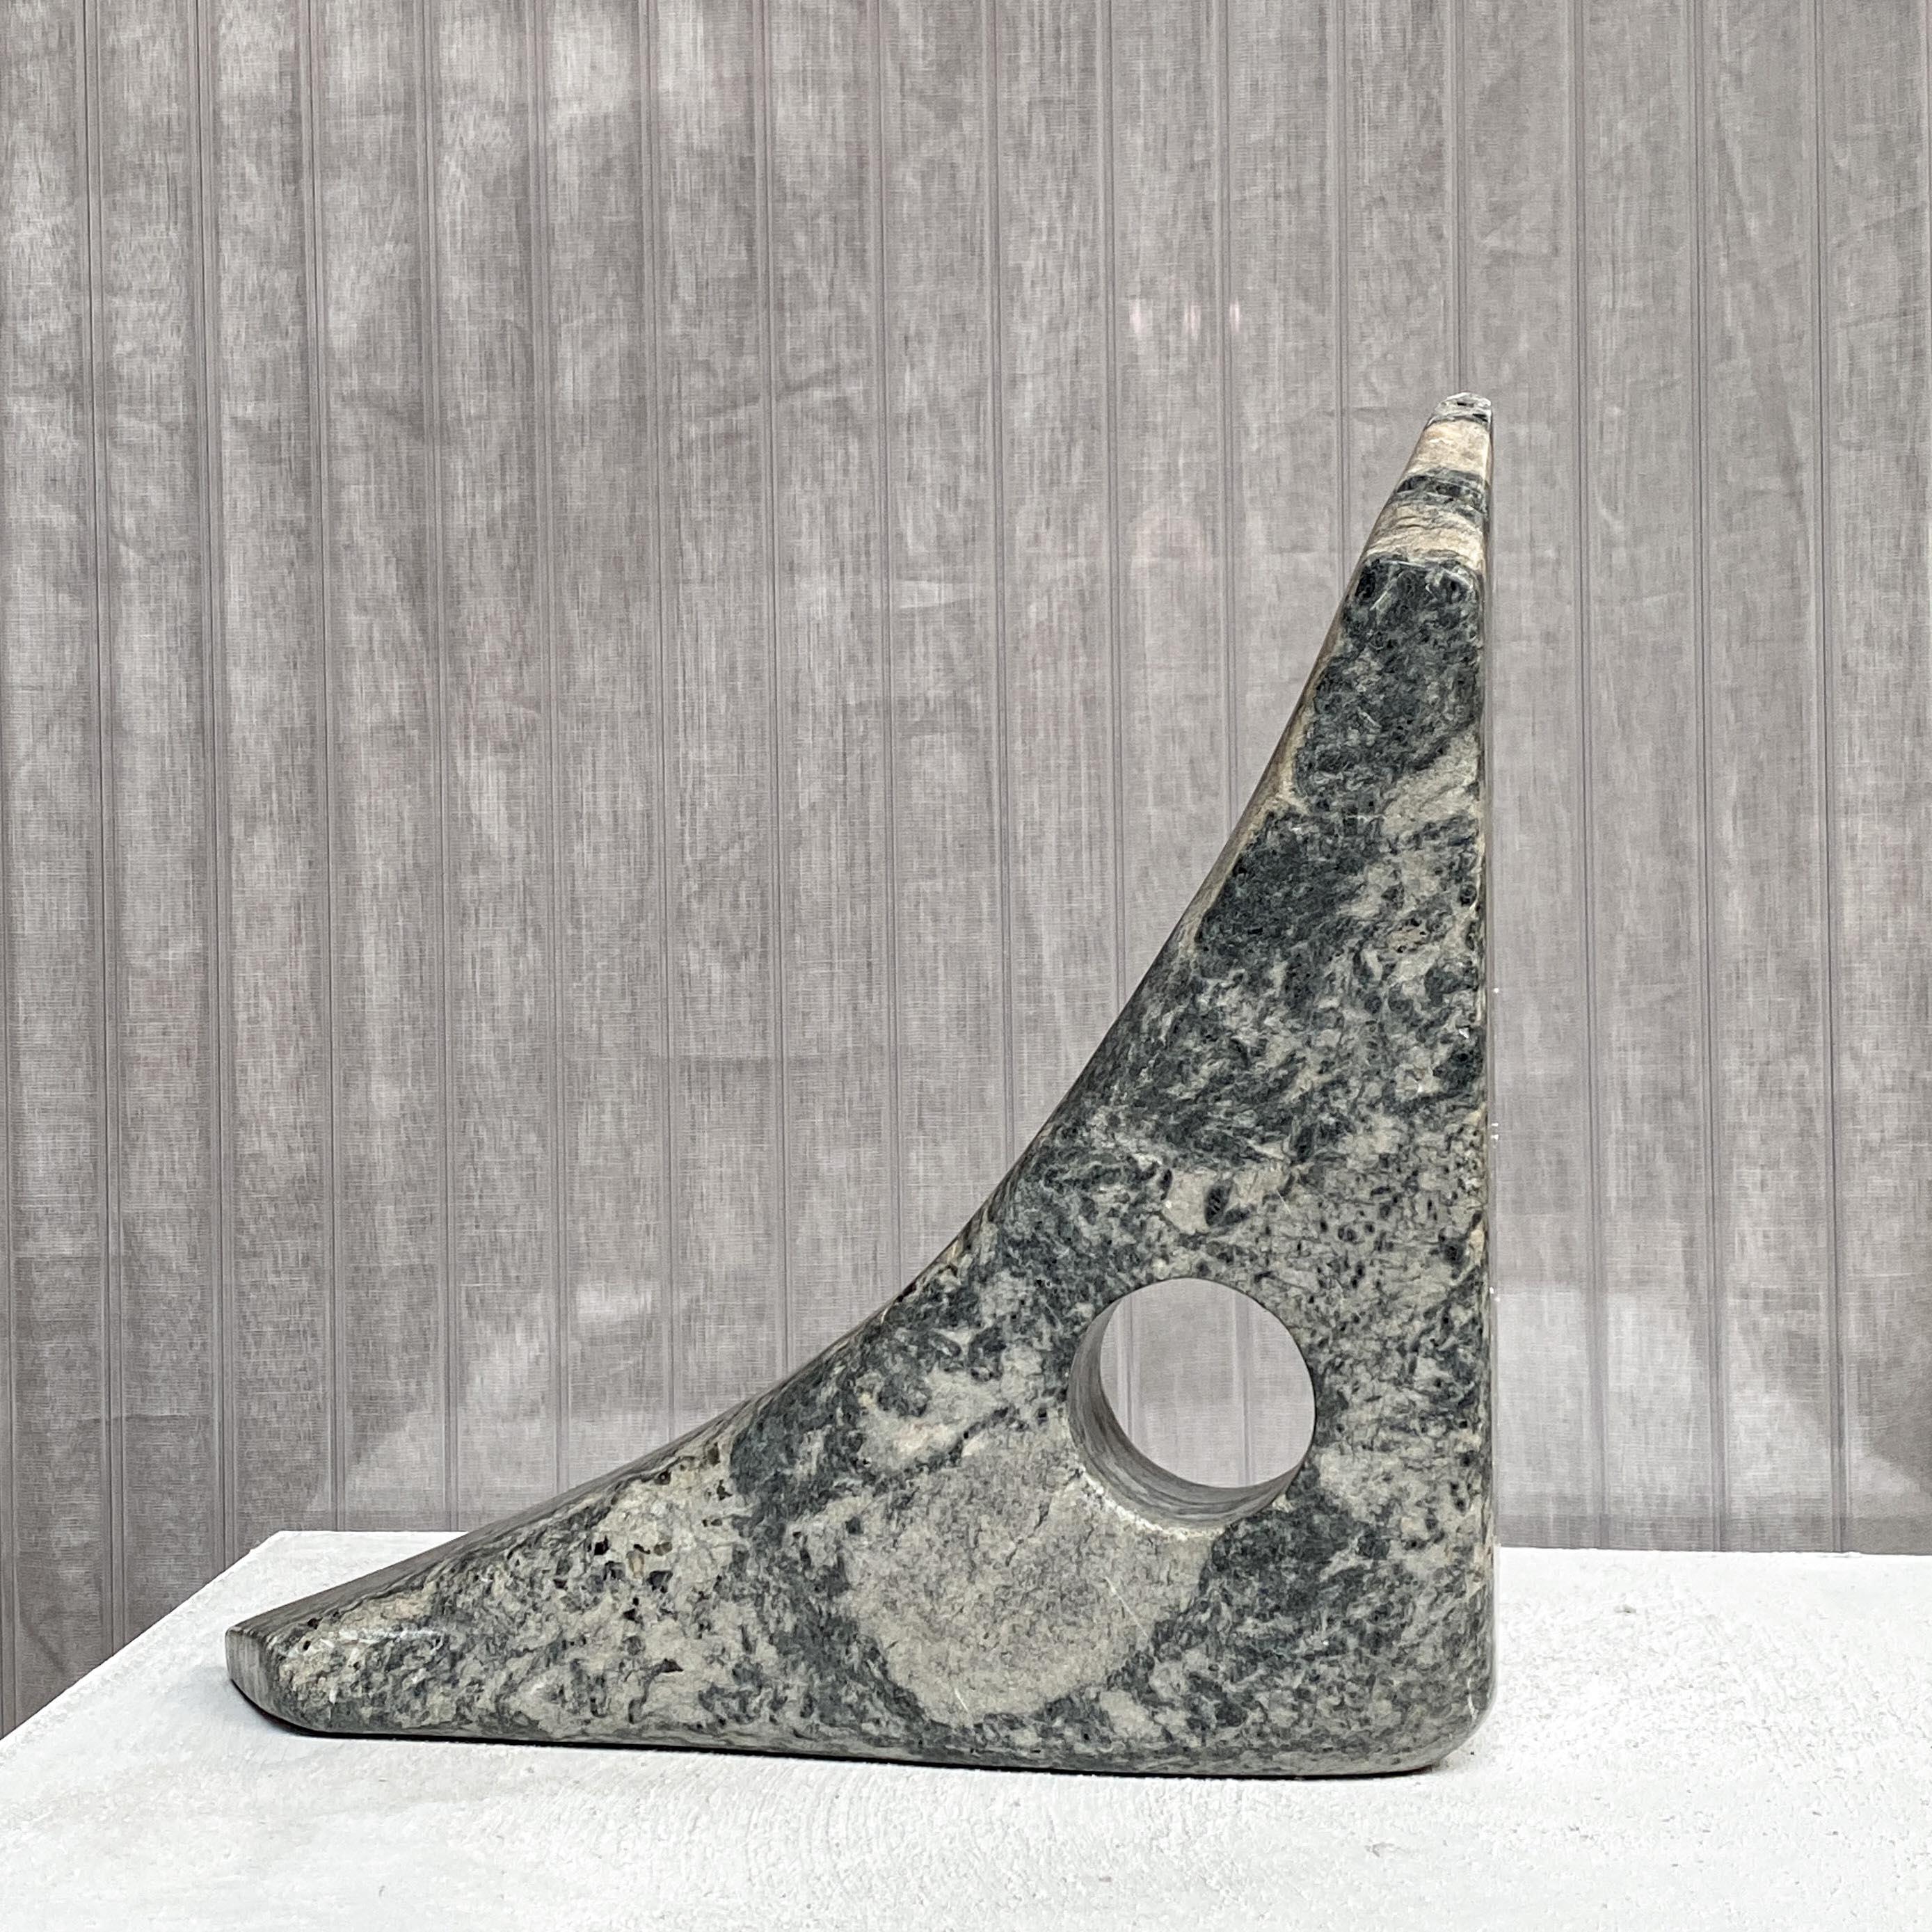 Dutch Modernist Stone Sculpture in Abstract Triangle Shape, 1960s, Noguchi Style